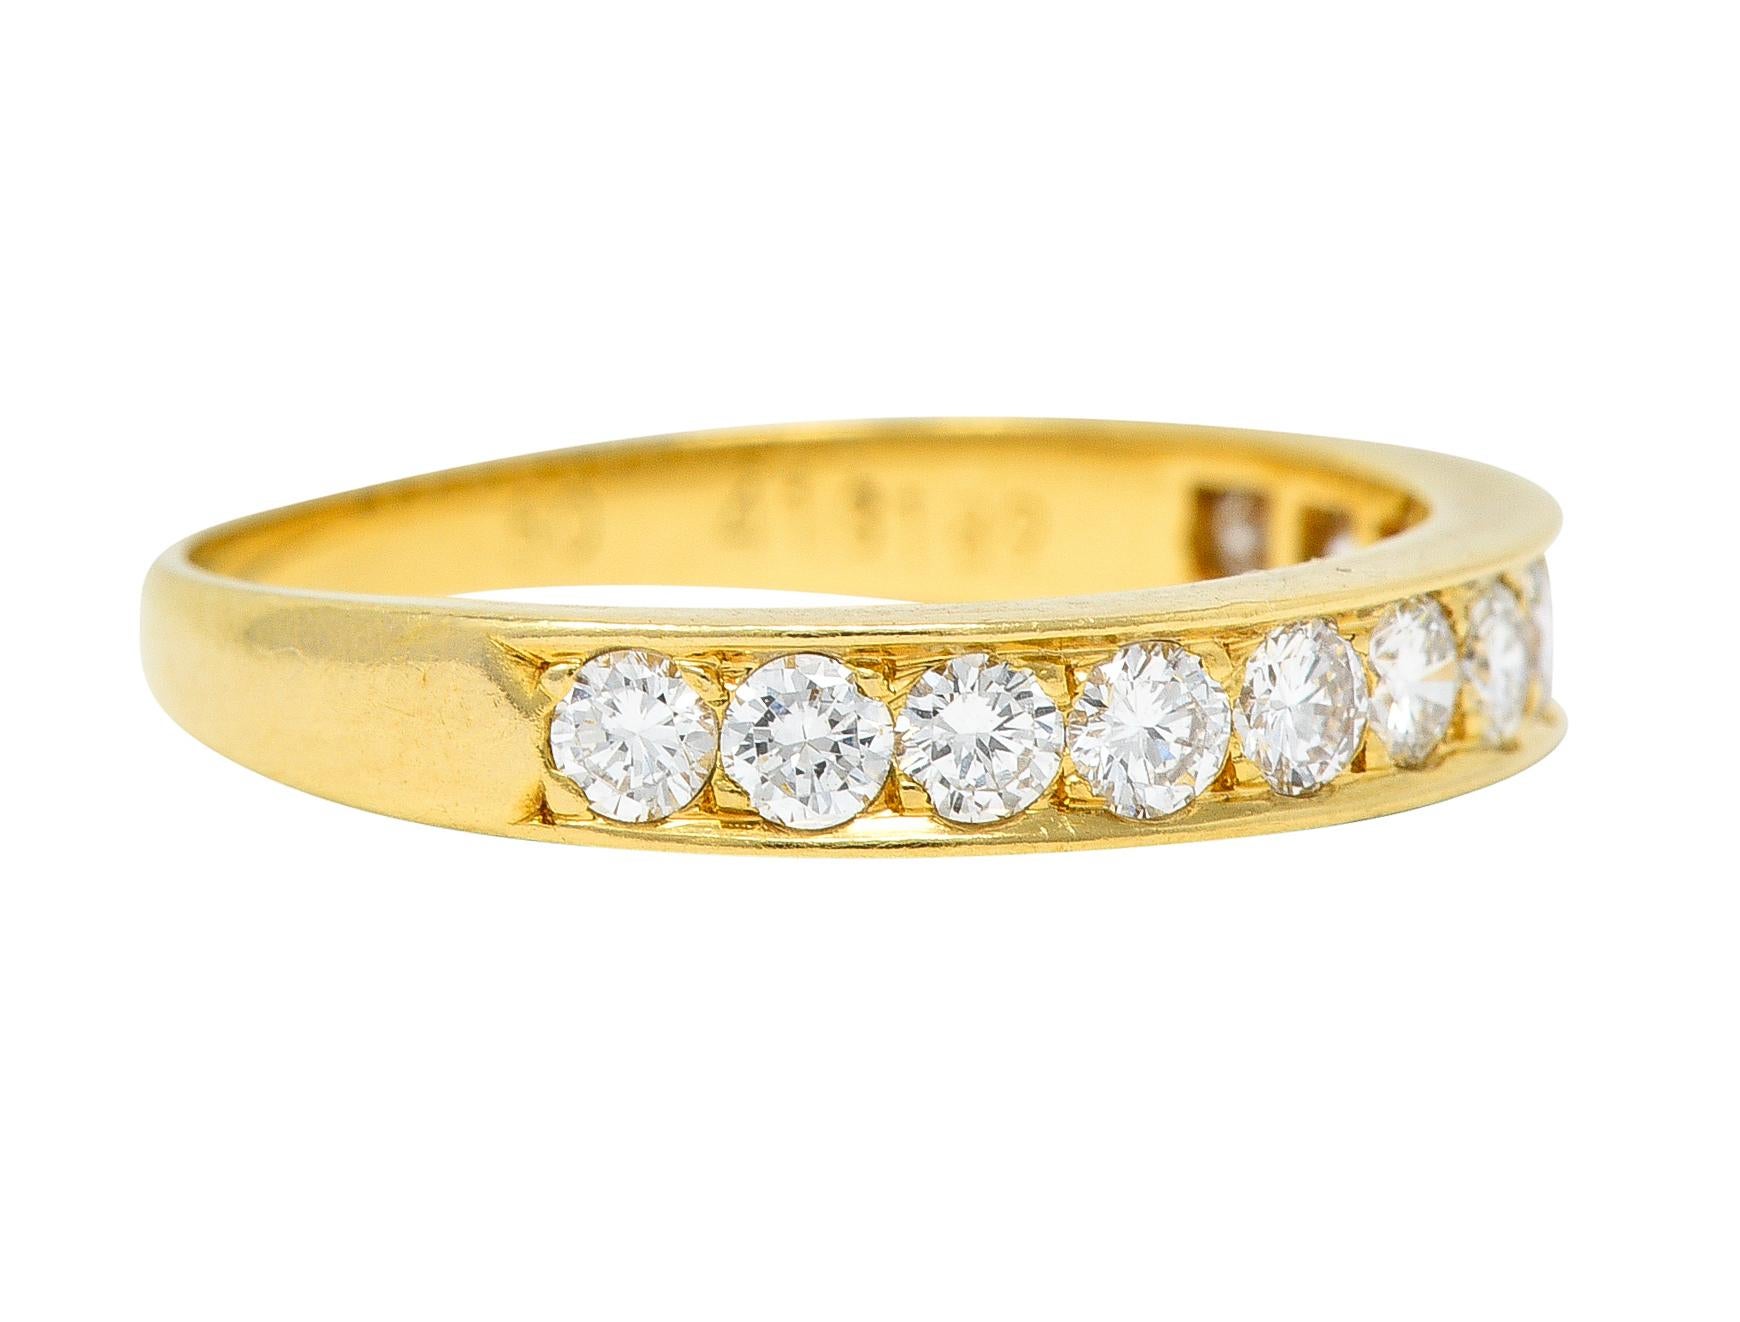 Featuring round brilliant cut diamonds bead set to front in a recessed channel. Weighing approximately 0.48 carats total - G/H color with VS clarity. Band tapers and has a high polish finish. Stamped 750 for 18 karat gold. Numbered and fully signed